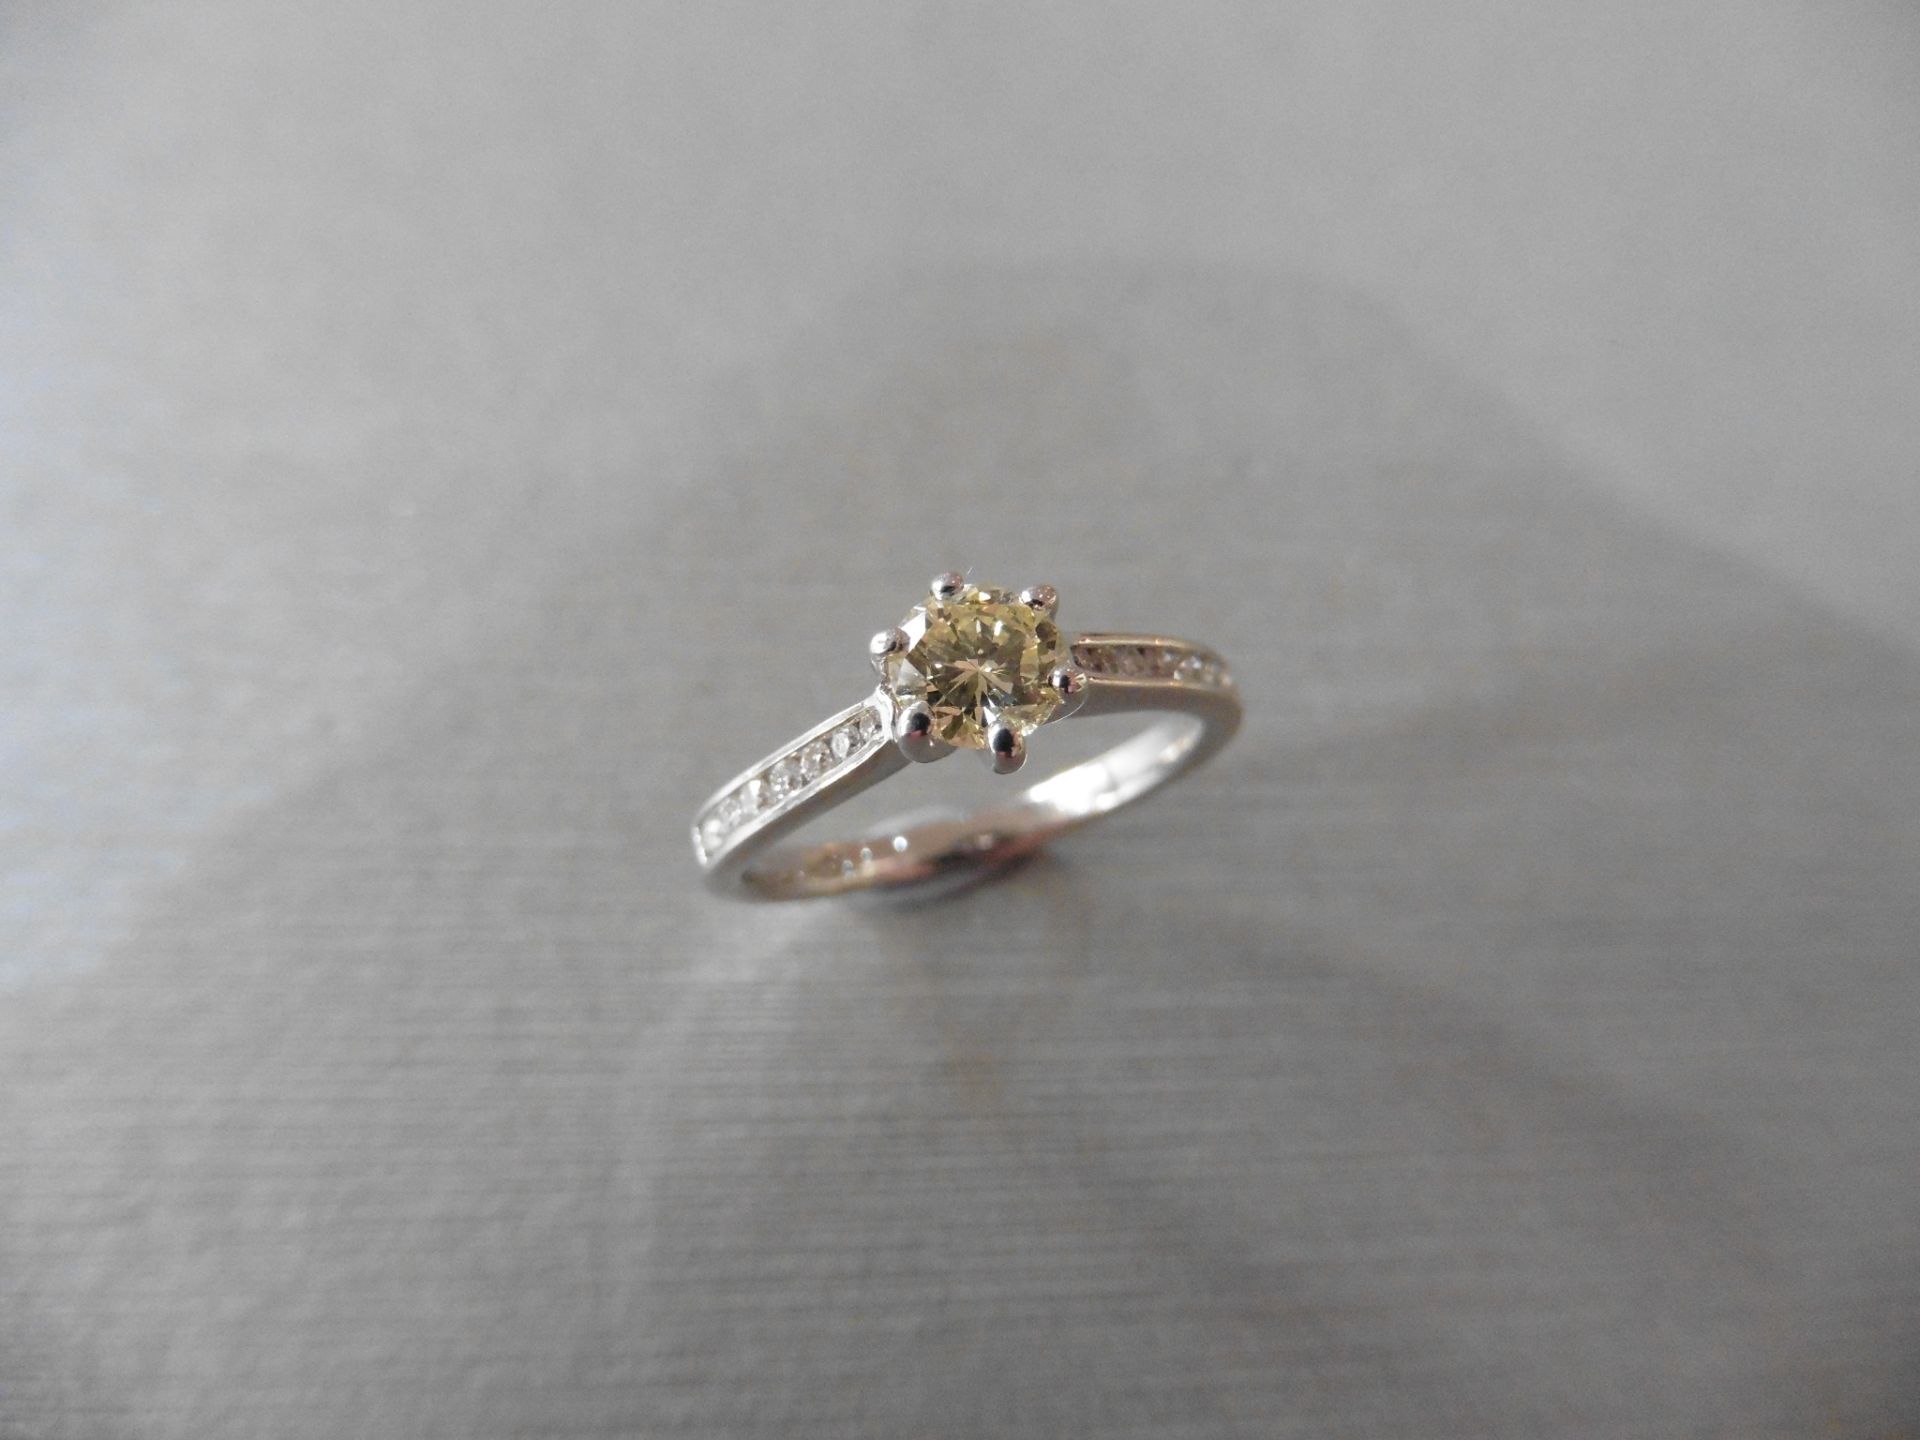 0.40ct Diamond set solitaire ring with a brilliant cut yellow diamond in the centre. The shoulders